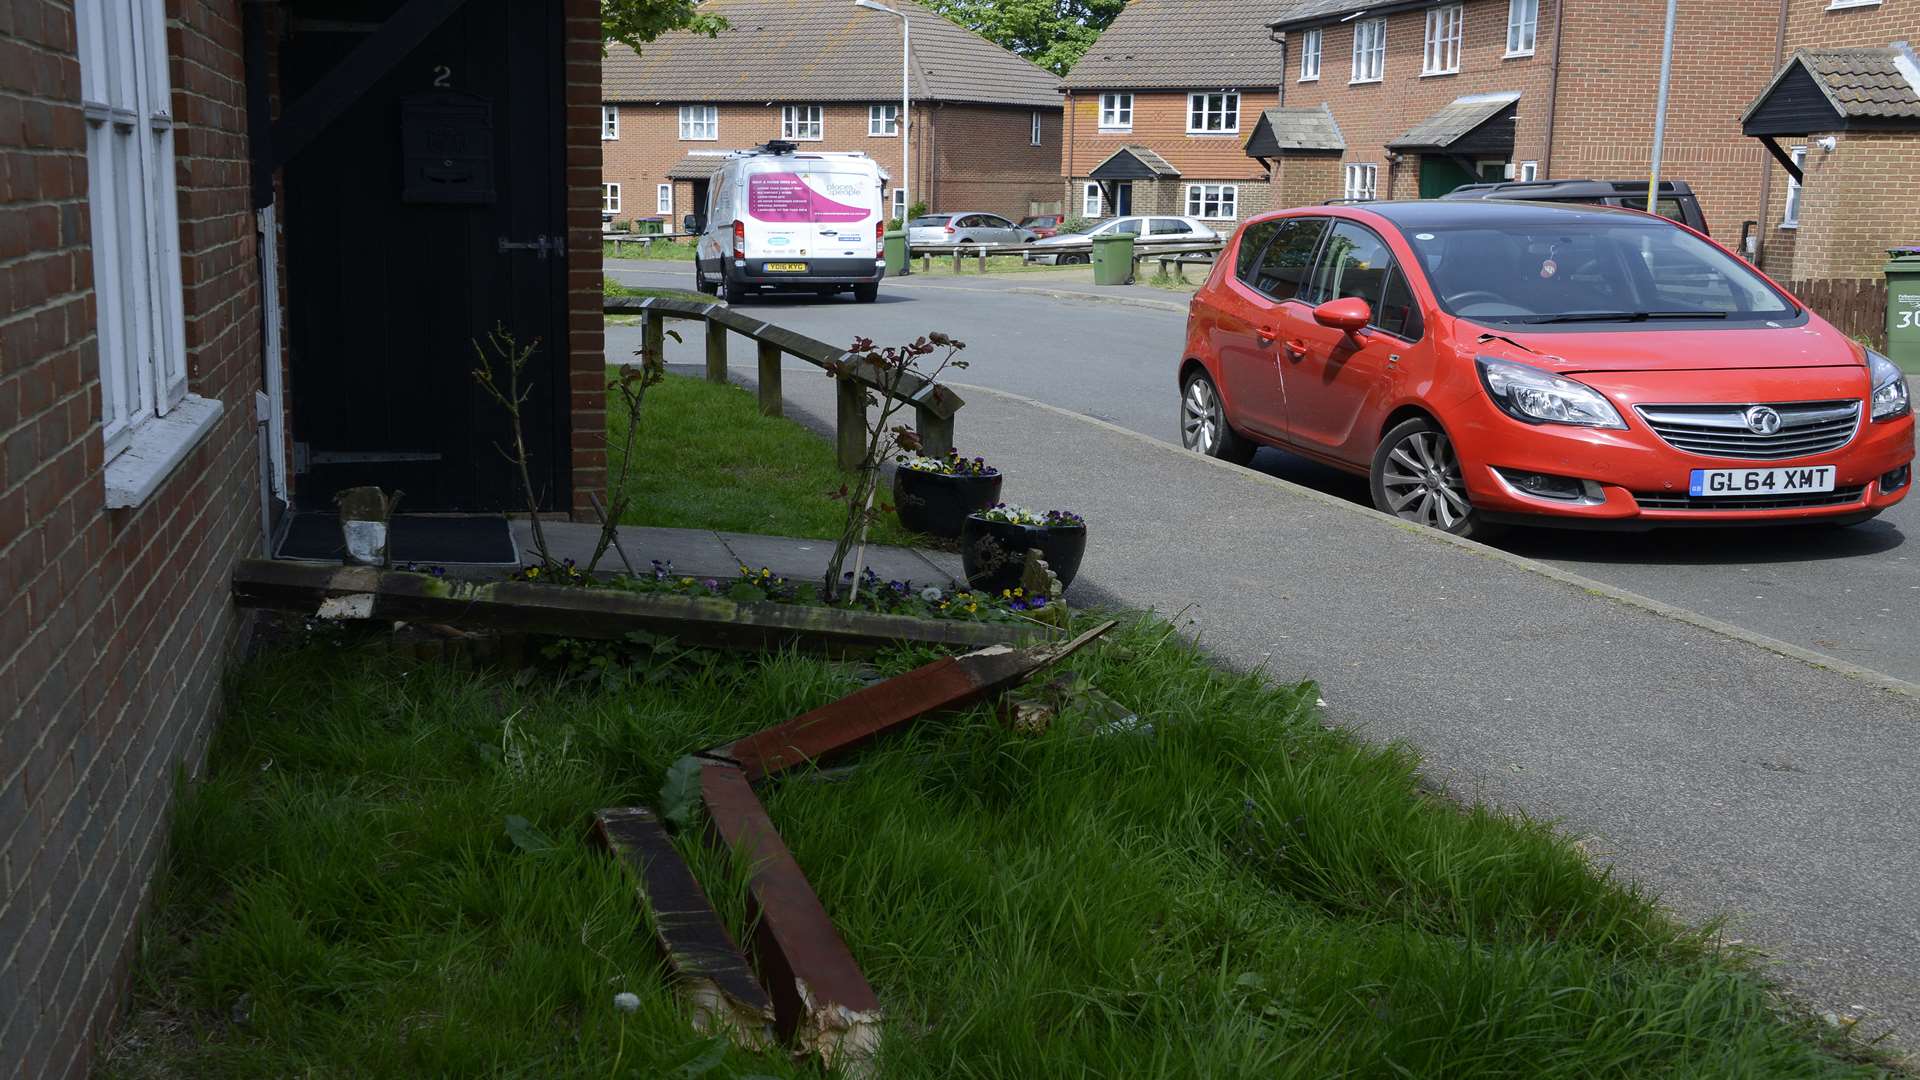 The dustcart smashed through a fence and hit the house. Picture: Paul Amos